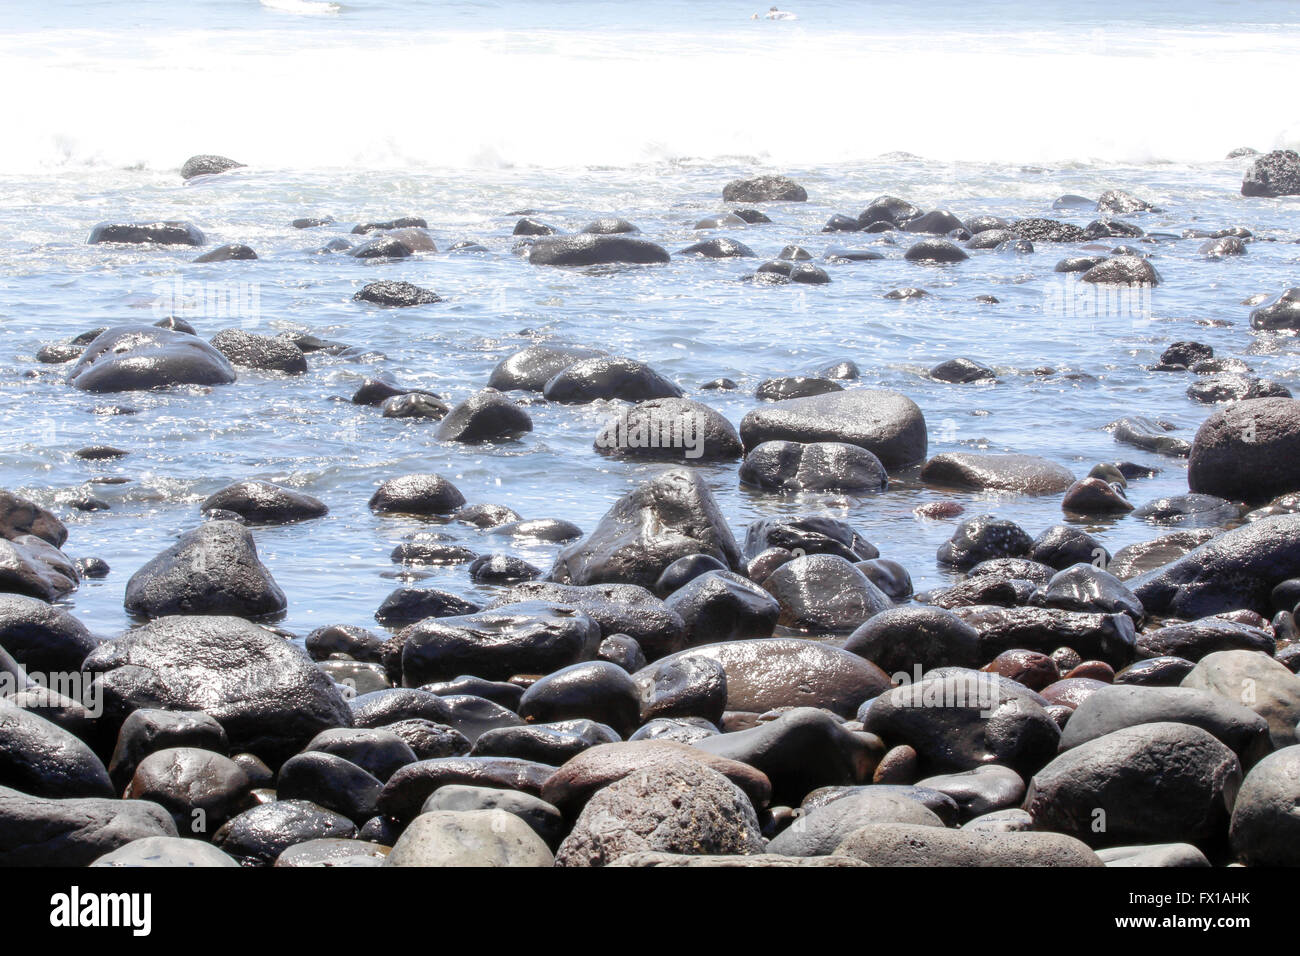 close up of the rocks and stones on the beach at El Tunco, El Salvador, Stock Photo